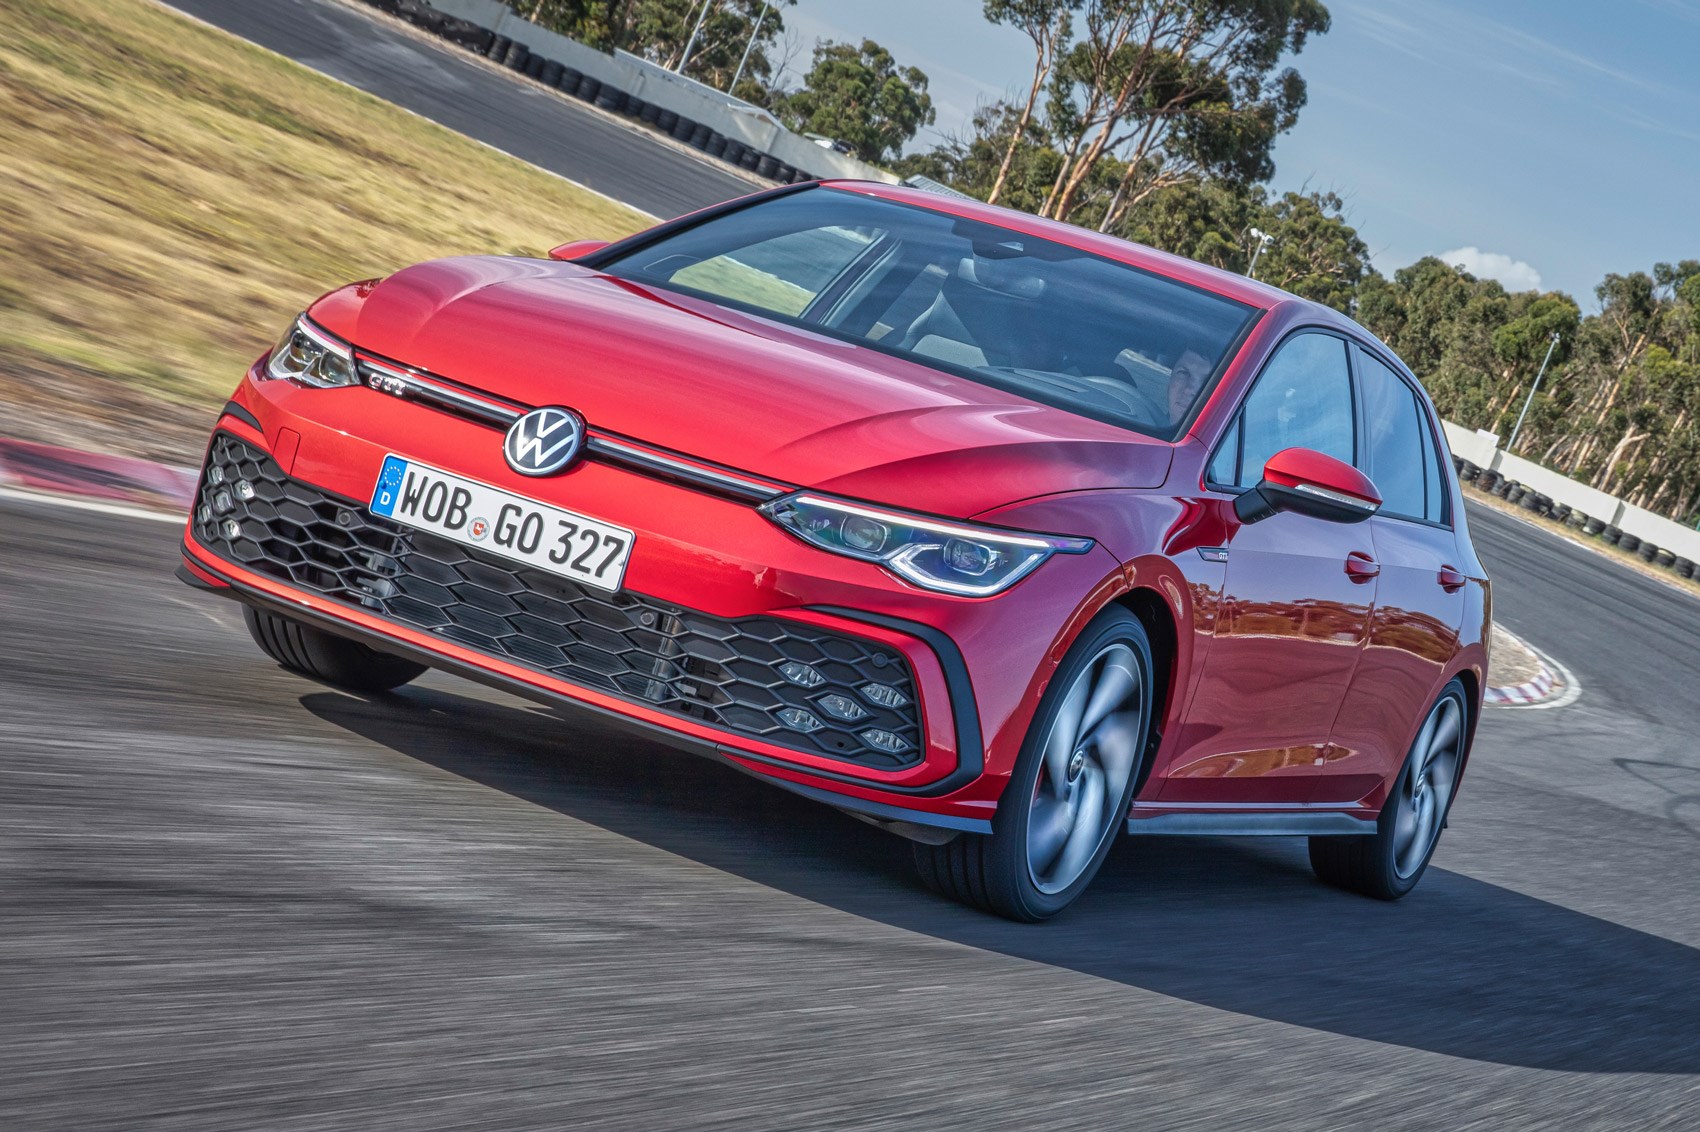 VW Golf GTI (2020) review: eight is great